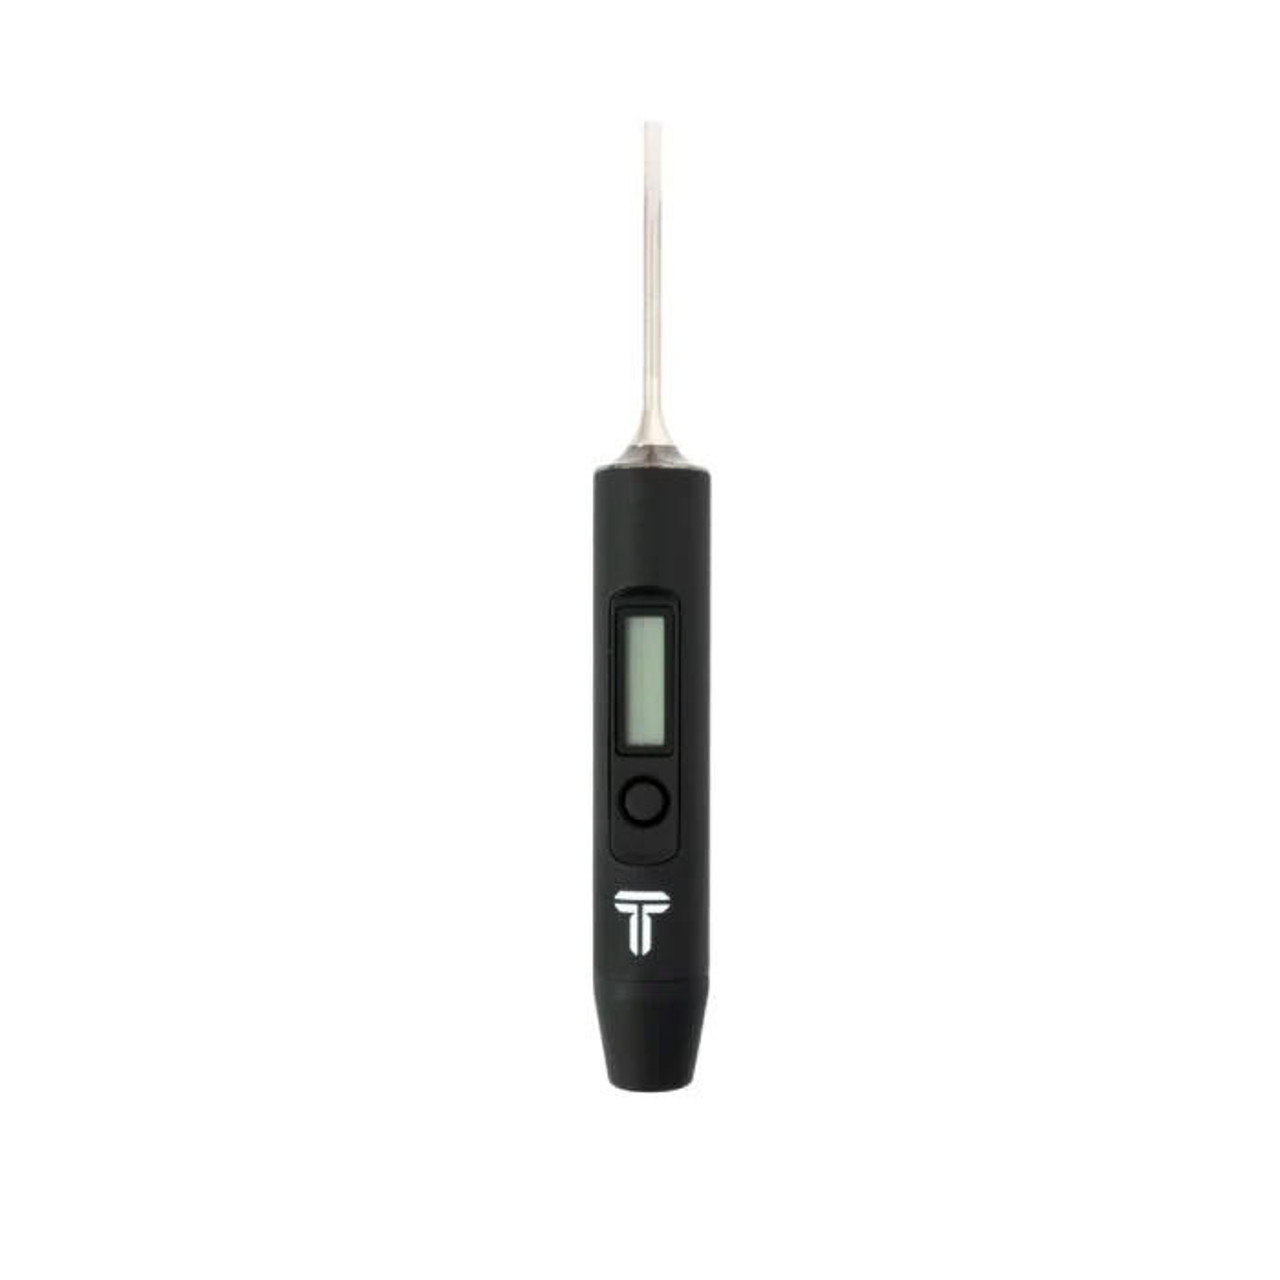 https://cdn11.bigcommerce.com/s-28tw9v9waz/images/stencil/1280x1280/products/2363/7553/terpometer-terp-ir-black-infrared-thermometer-for-dabbing__34477.1680507402.jpg?c=1?imbypass=on